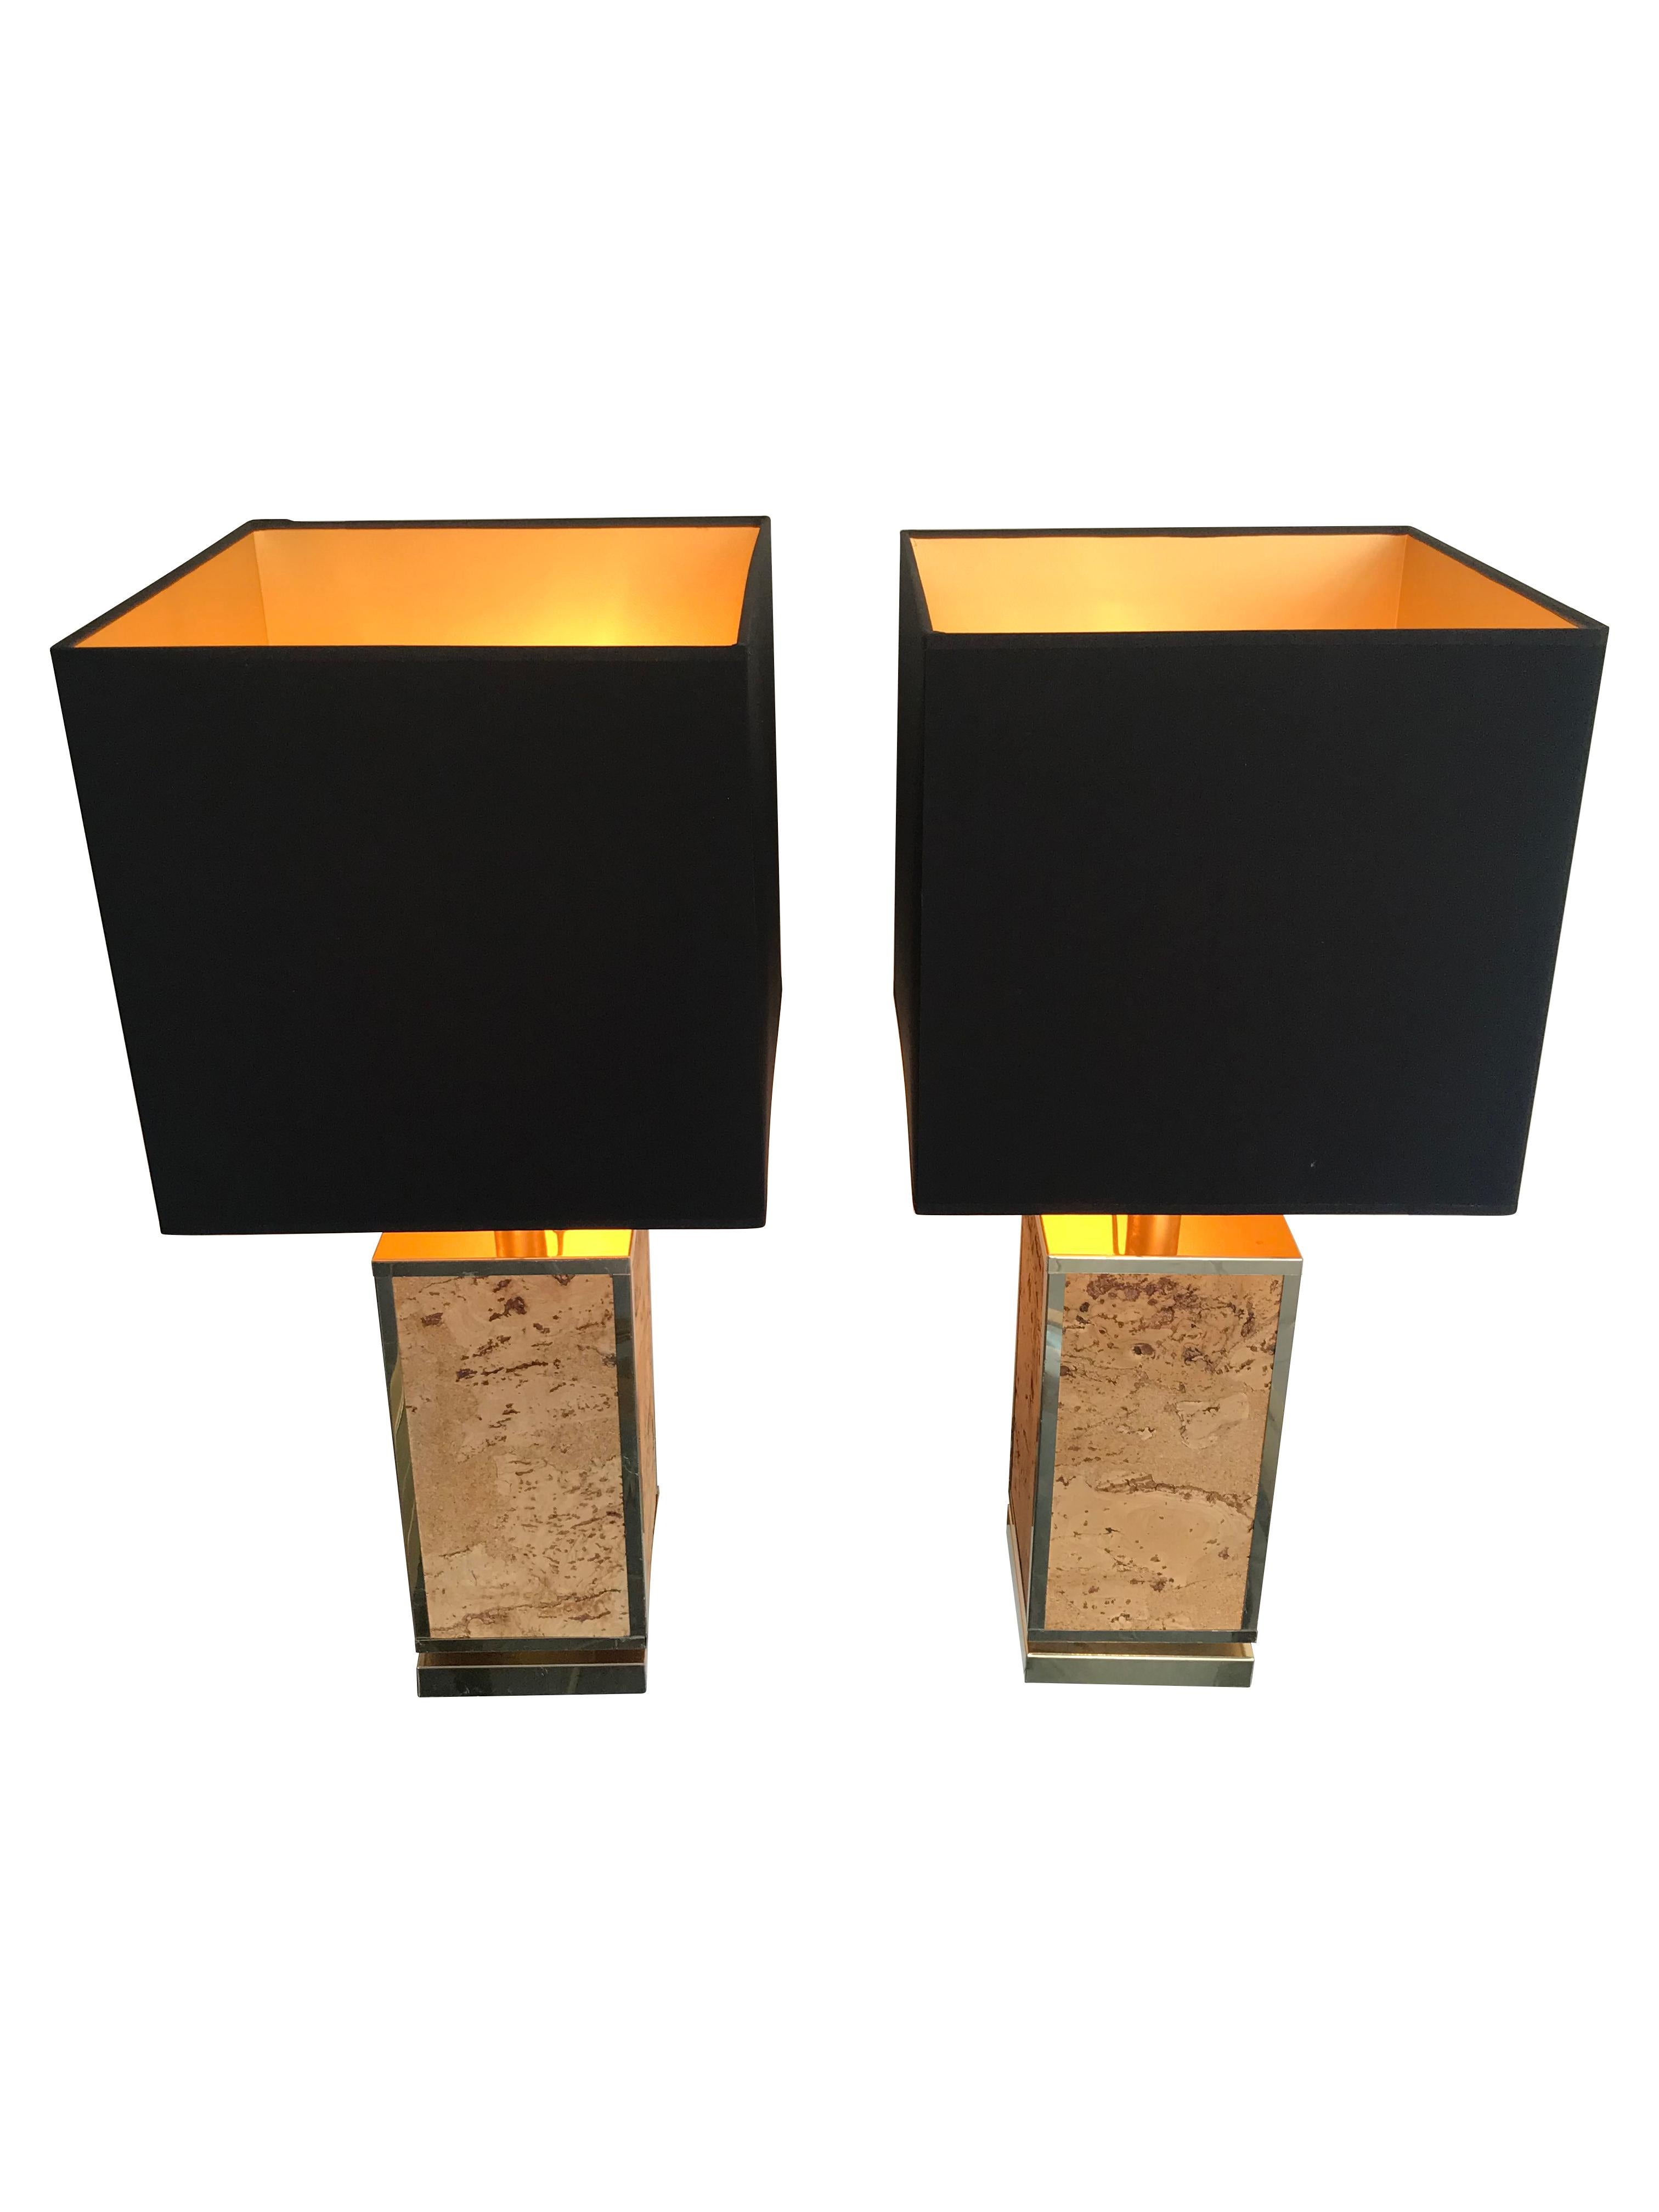 A pair of Italian lamps with cork inlay and gilt metal base and finish. With new bespoke black shades with gold linings. Re wired with new fittings and antique gold cord flex and PAT tested.